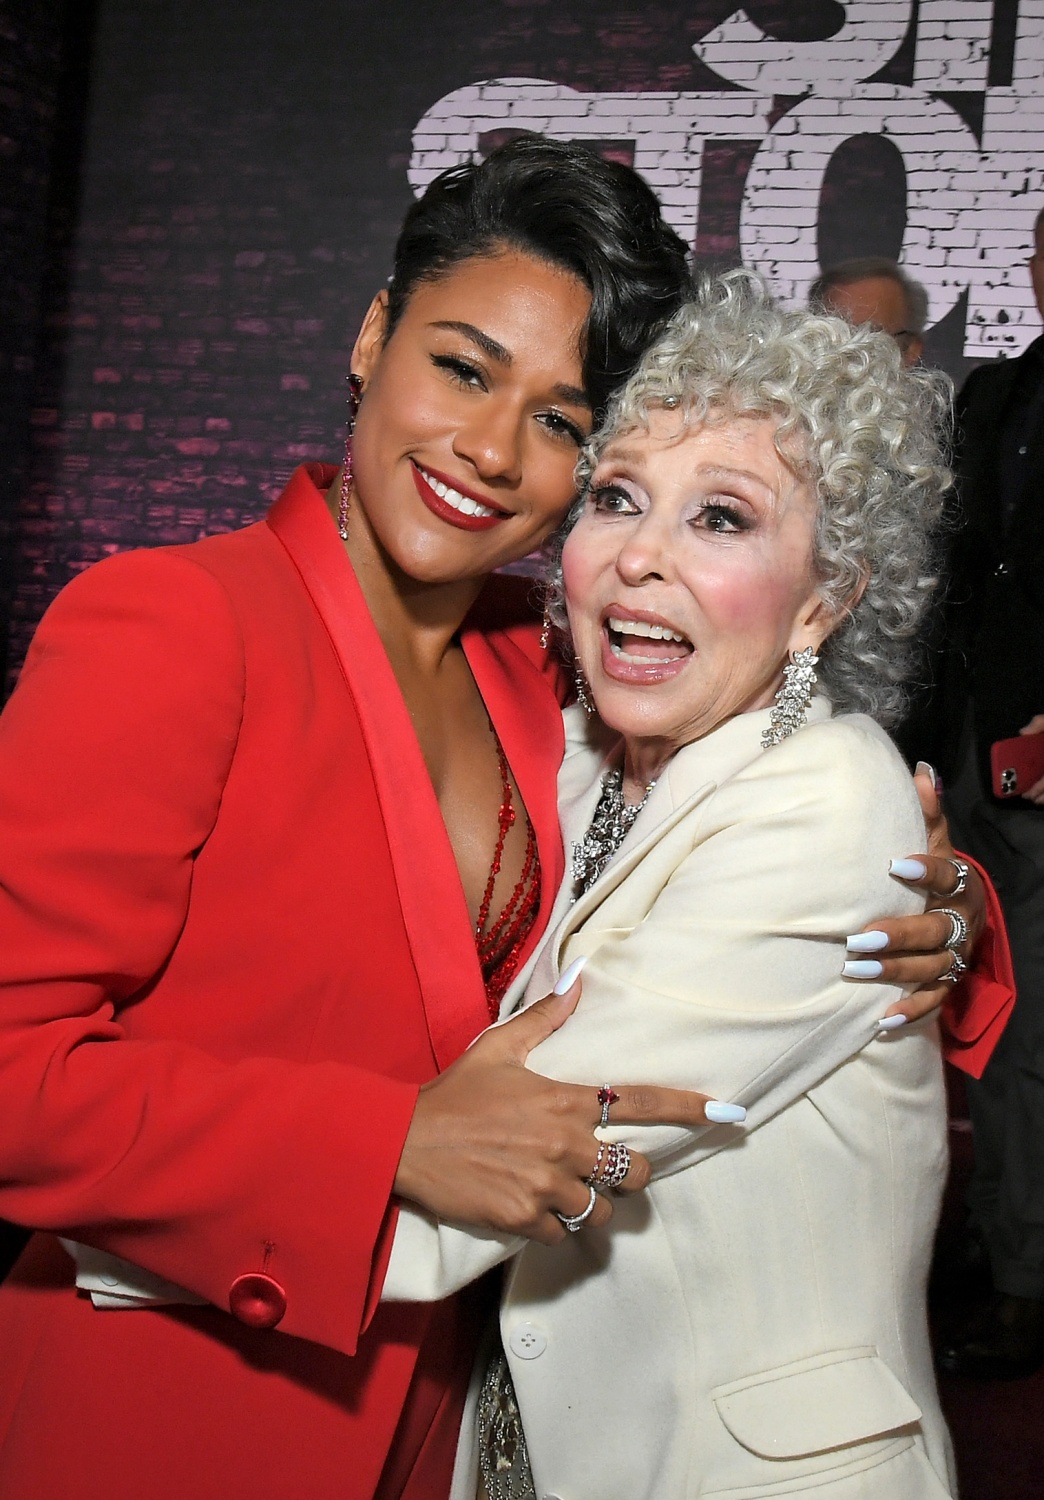 Ariana DeBose and Rita Moreno attend the Los Angeles premiere of West Side Story, held at the El Capitan Theatre in Hollywood, California on December 07, 2021. 